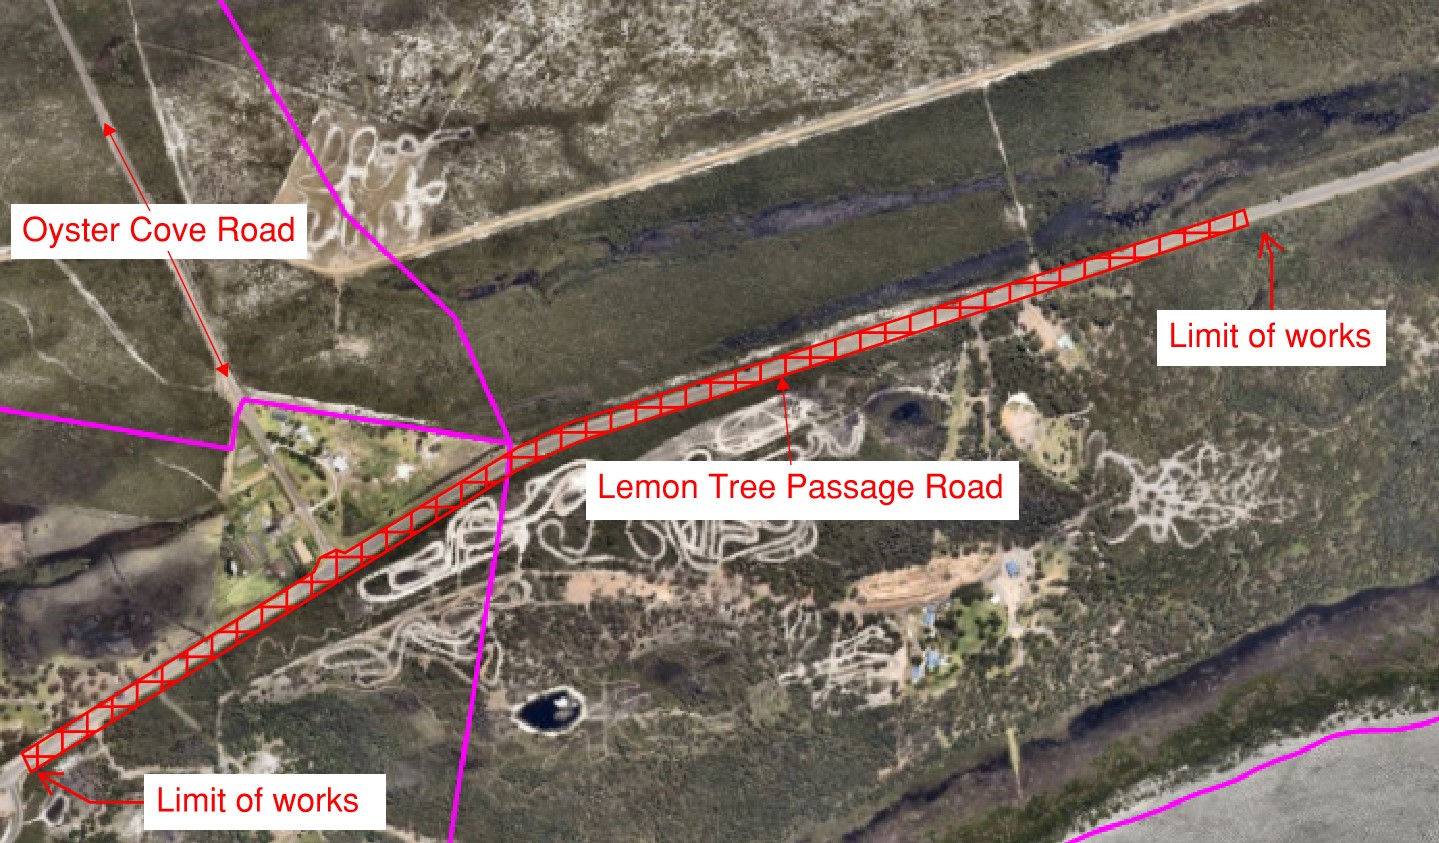 LTP Road - Oyster Cove Rd - map